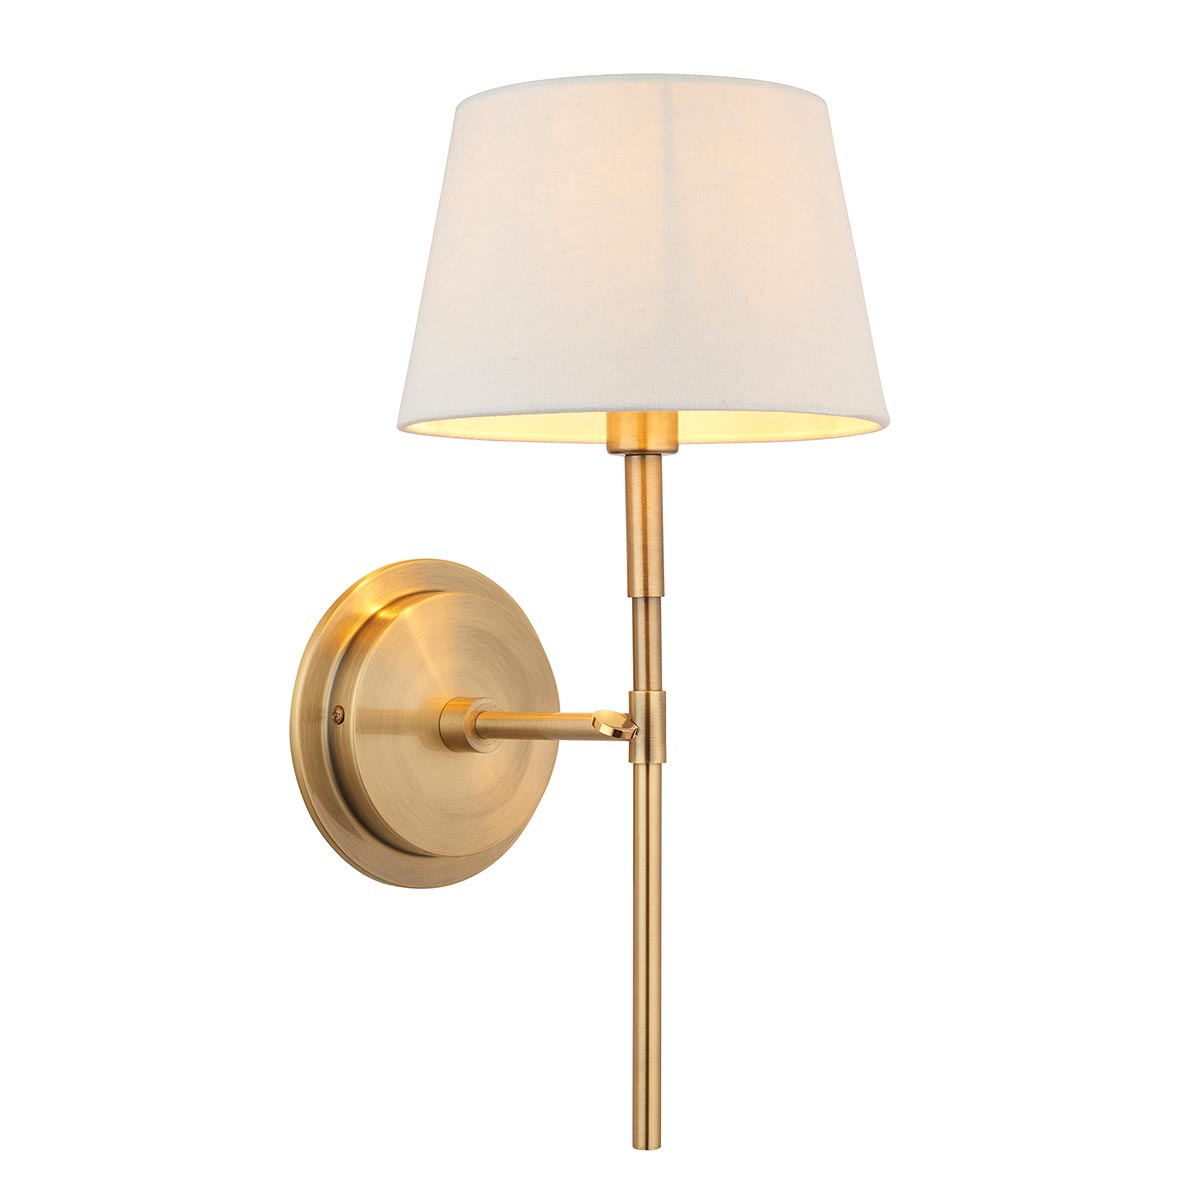 Endon Rennes Antique Brass Wall Light With Ivory Shade